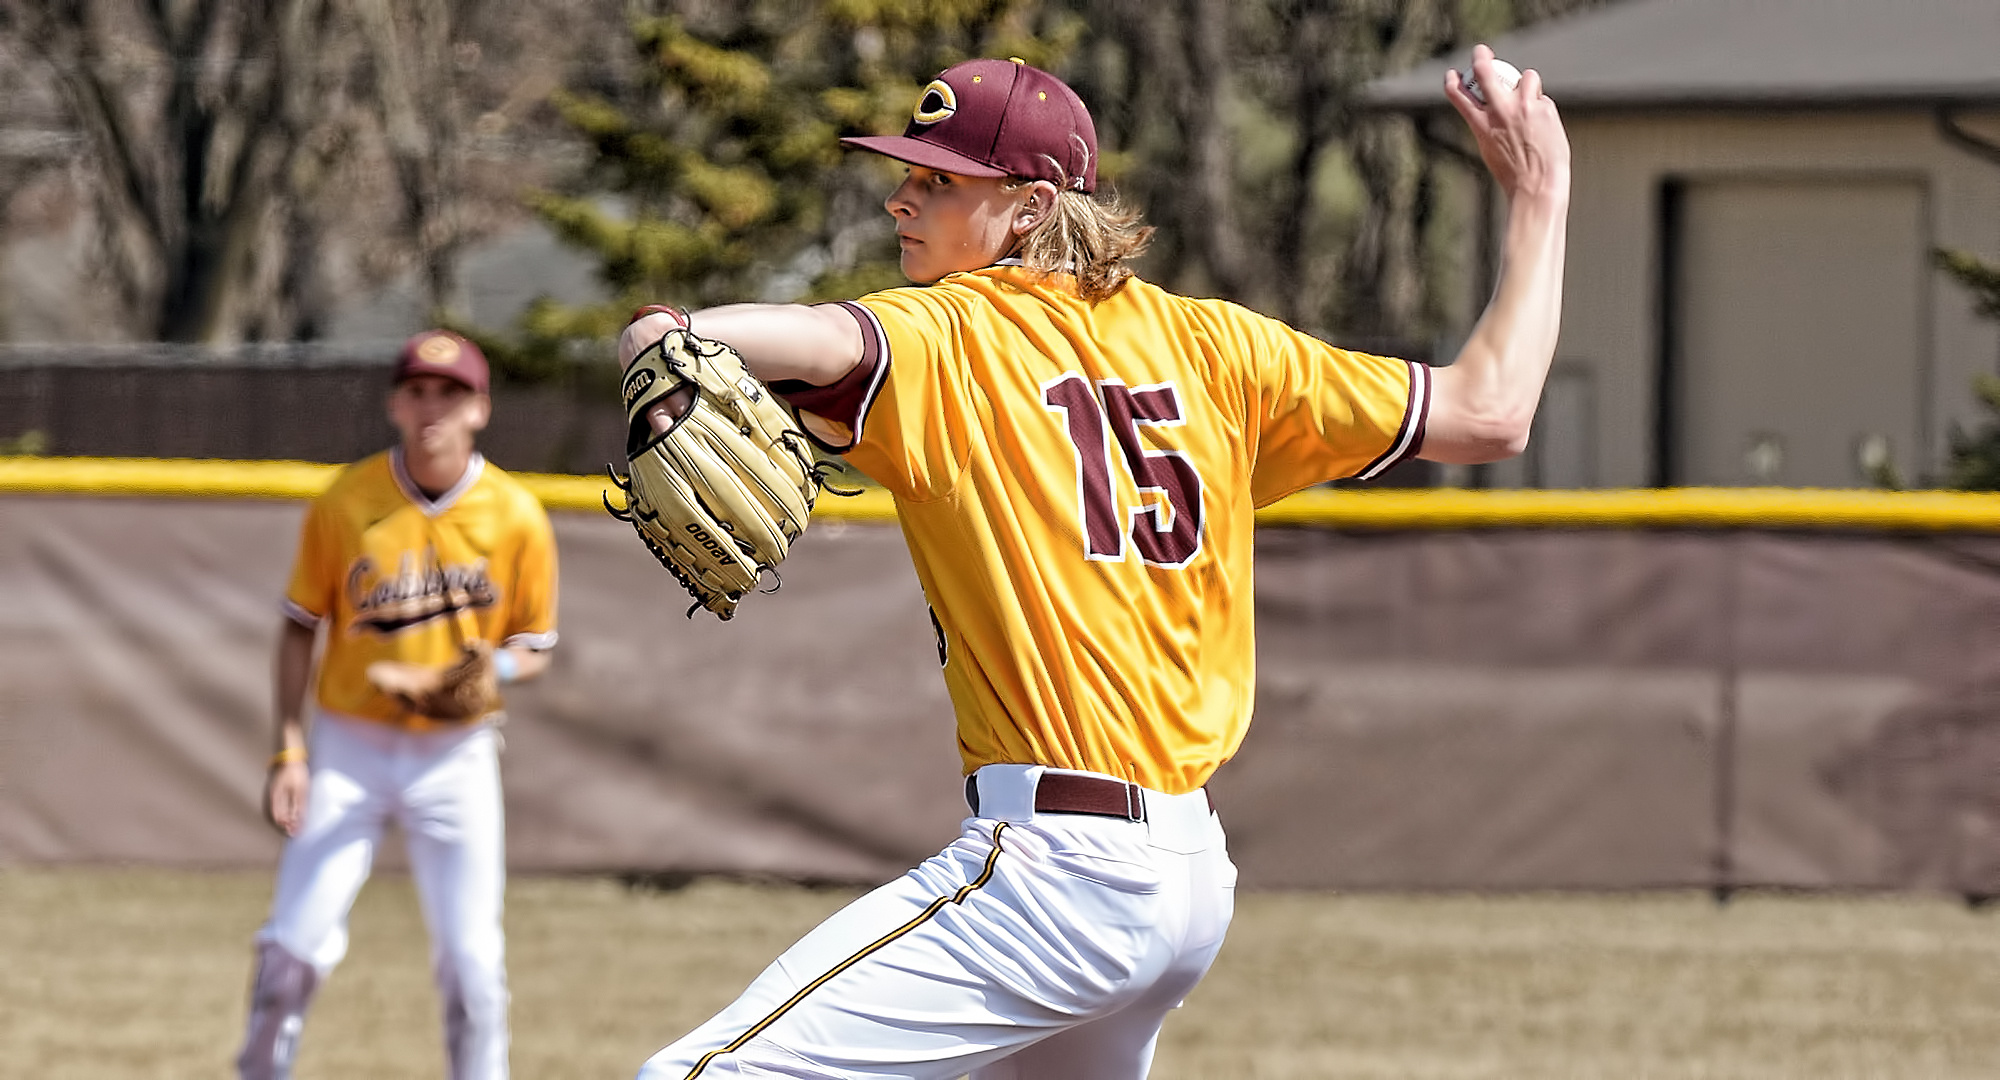 Junior pitcher Ty Syverson pitched 6.0 scoreless innings and recorded his second win in Florida as the Cobbers beat Beloit 4-0 in the second game to earn a split in the DH.